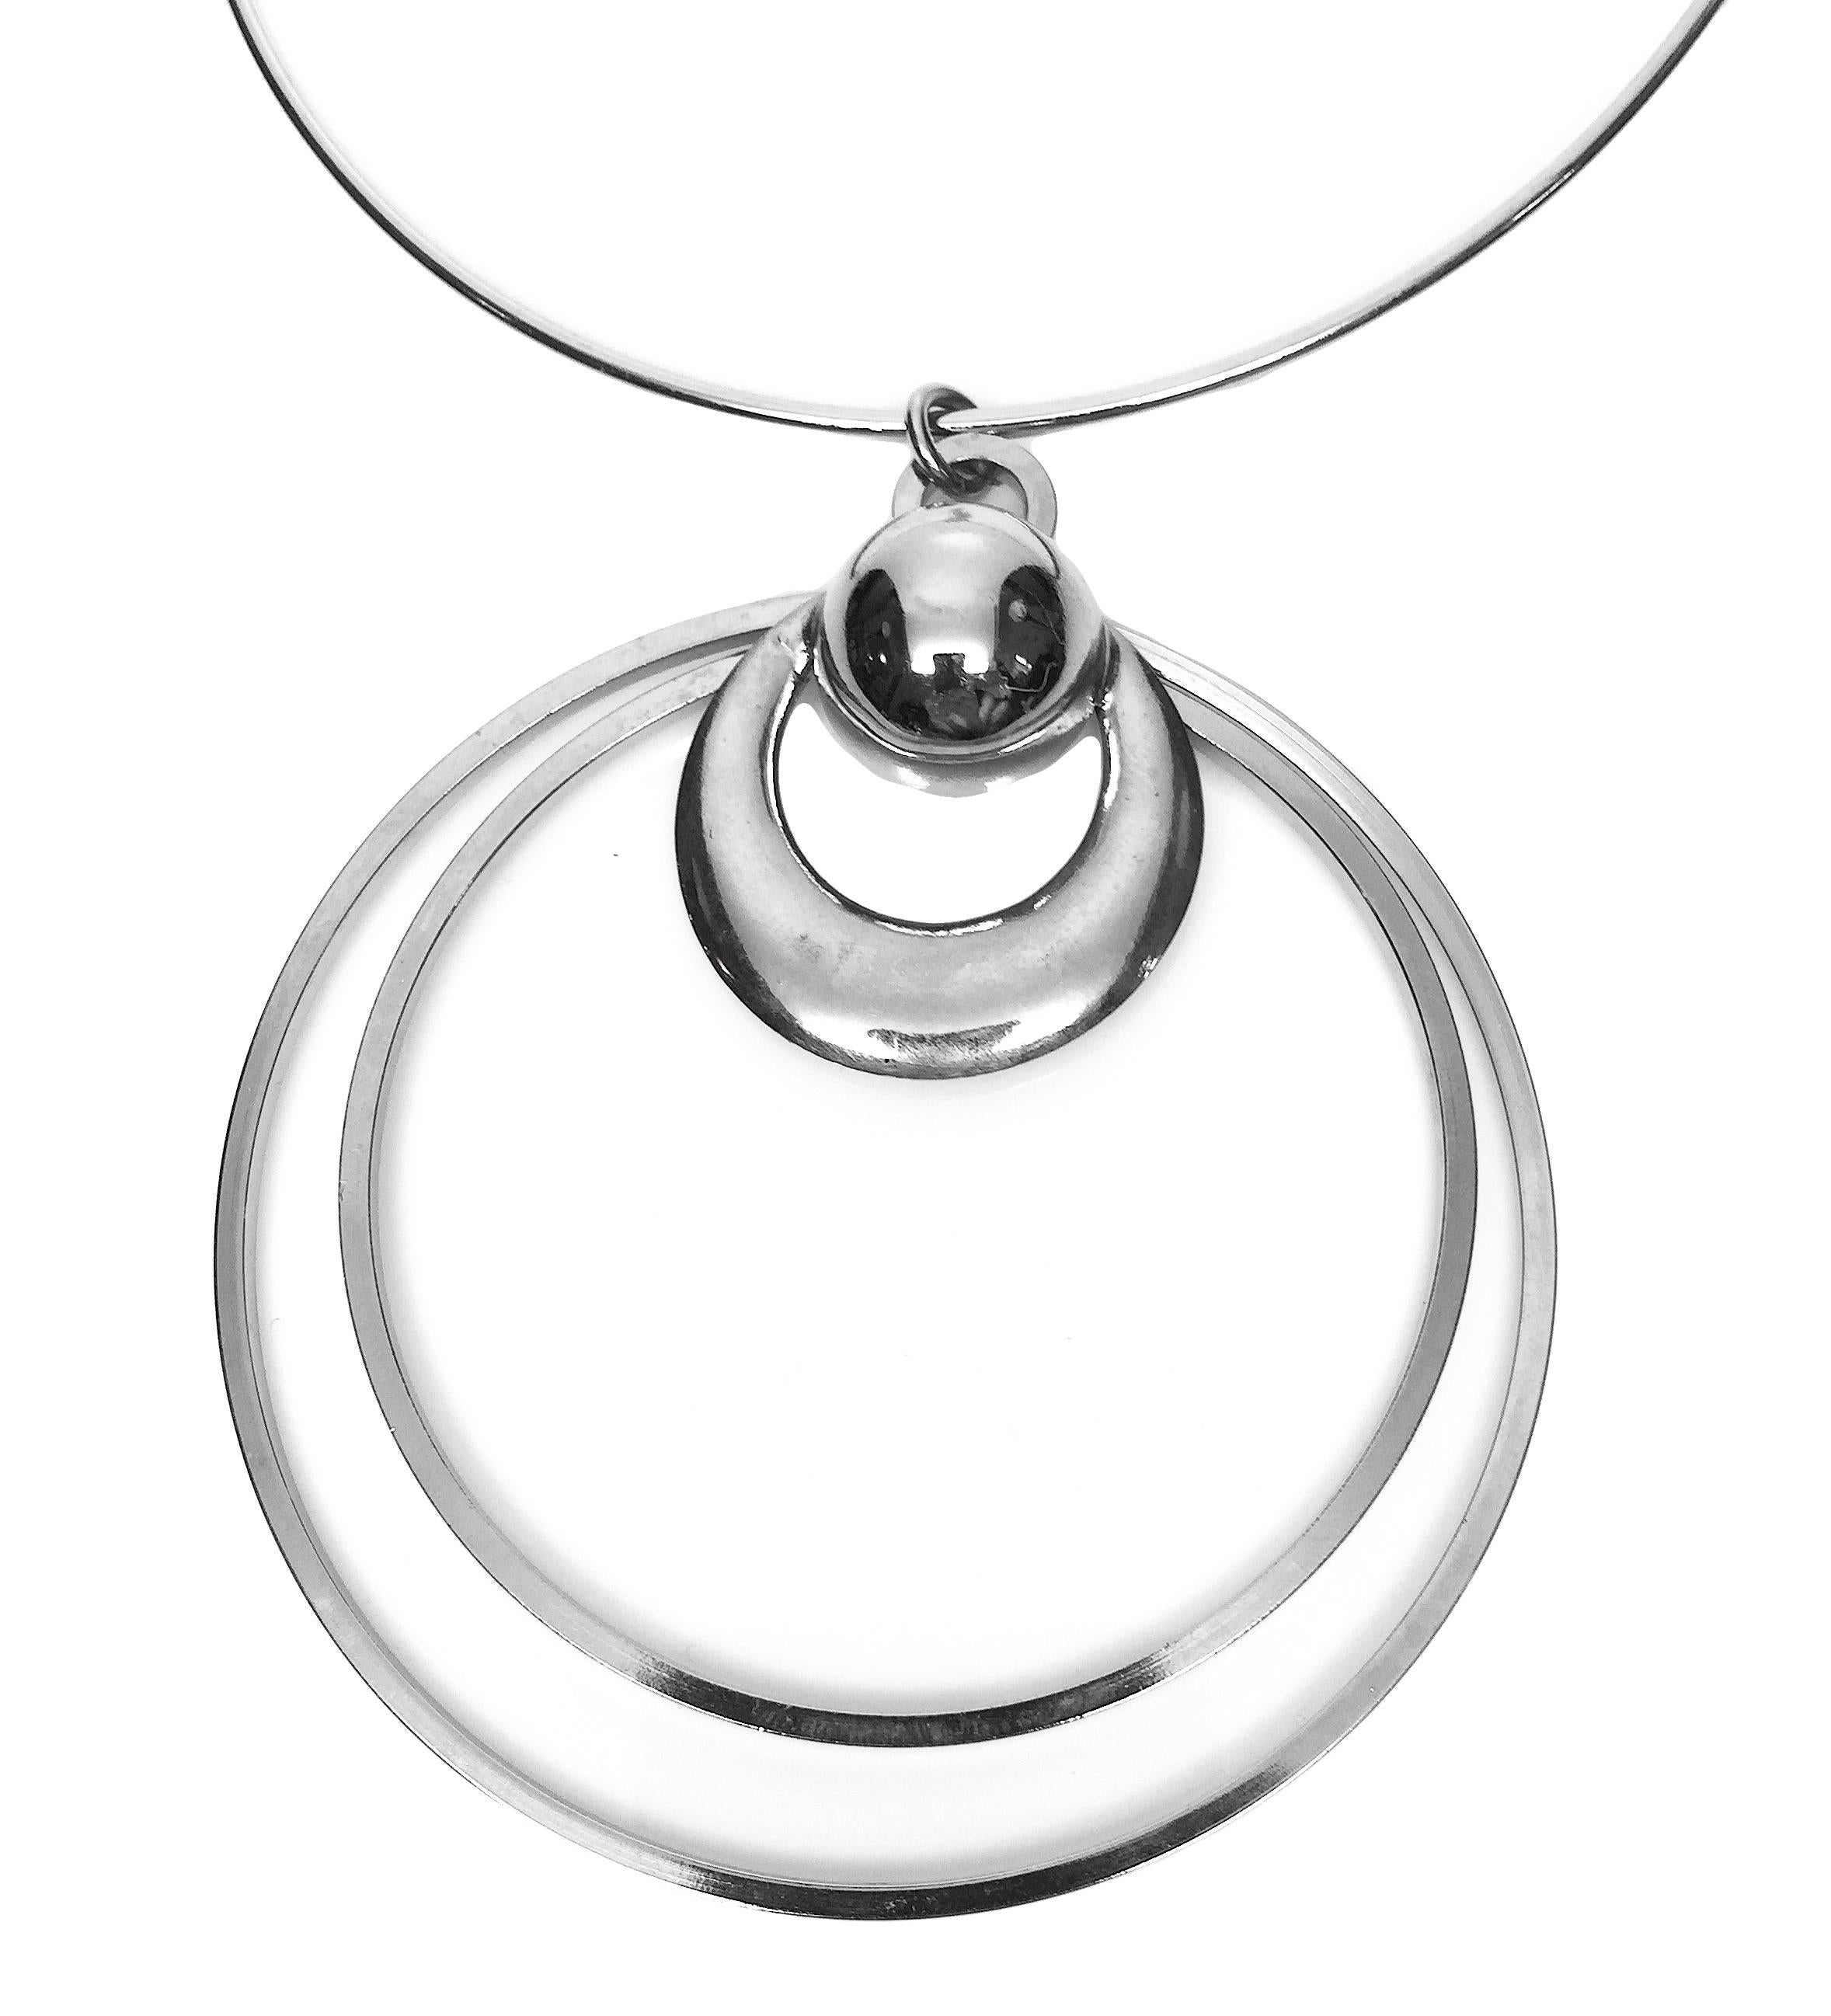 Pierre Cardin attributed unsigned prototype necklace circa 1975. The necklace consists of a metal choker with hook closure, and a large metal pendant with concentric circles. Unsigned but confirmed Pierre Cardin prototype. 

Diameter 16